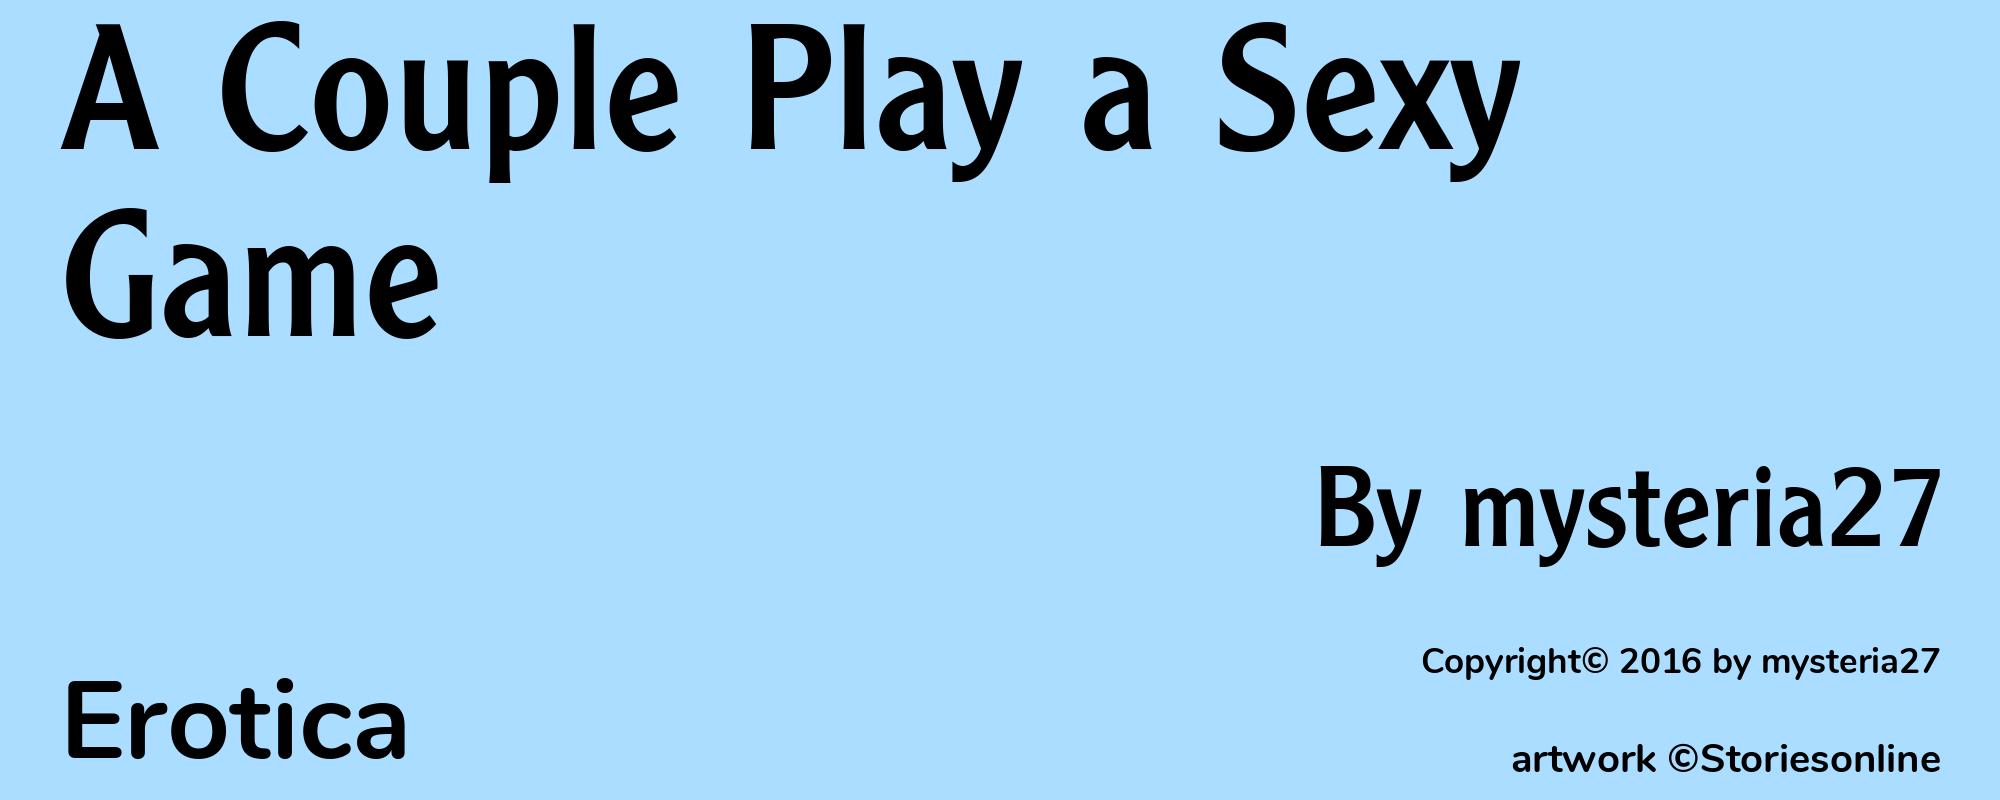 A Couple Play a Sexy Game - Cover